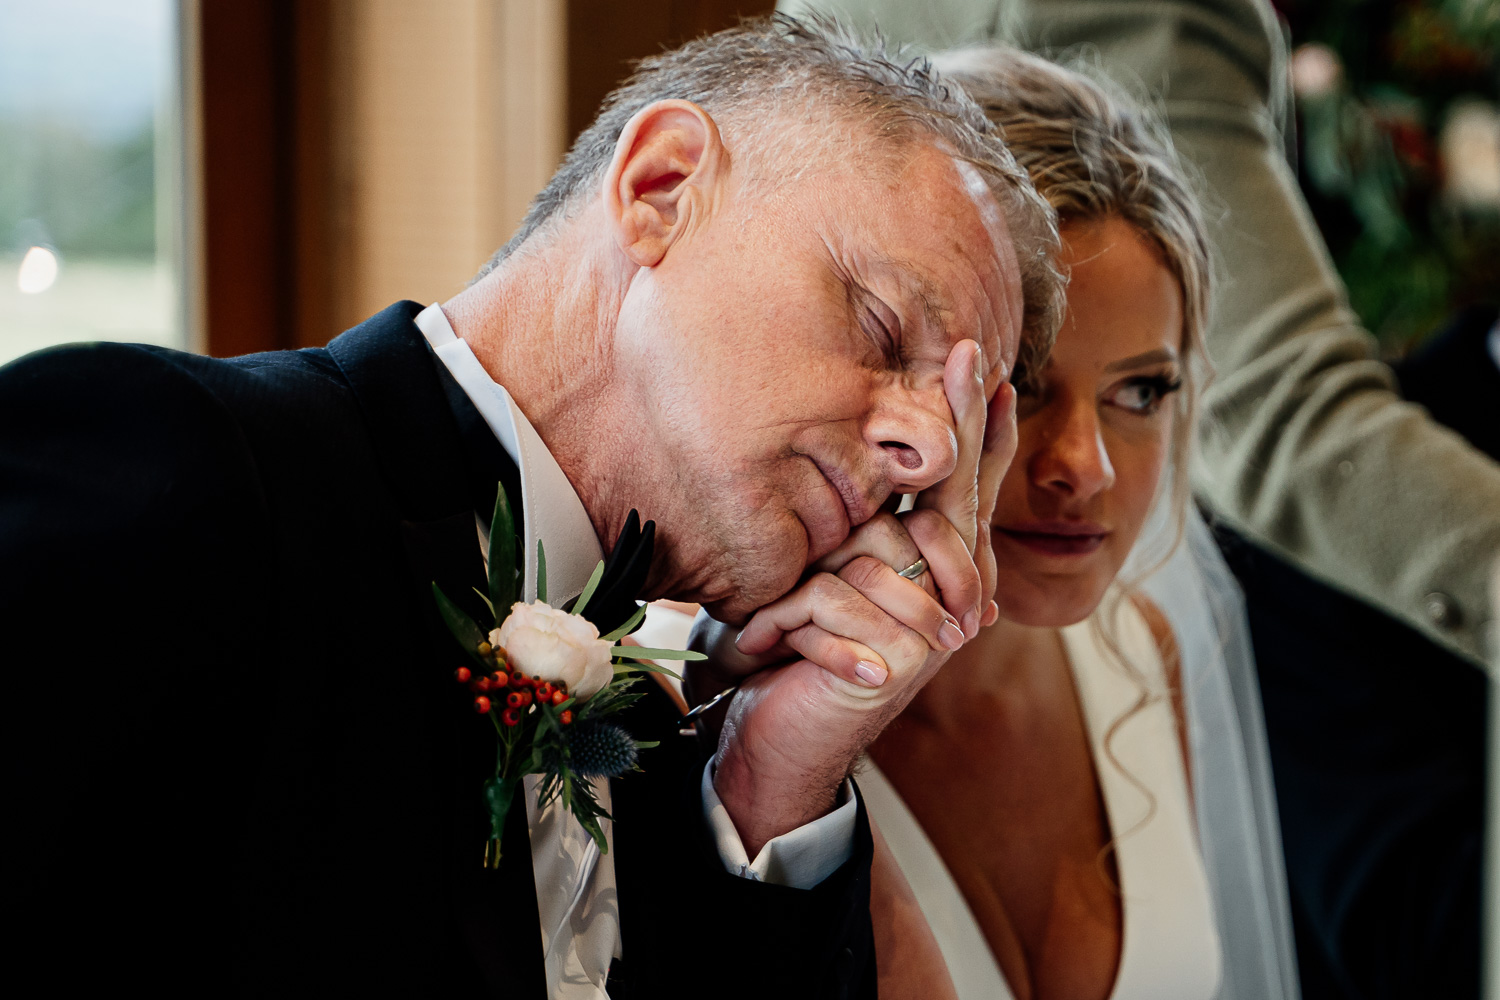 Father of bride upset during speeches